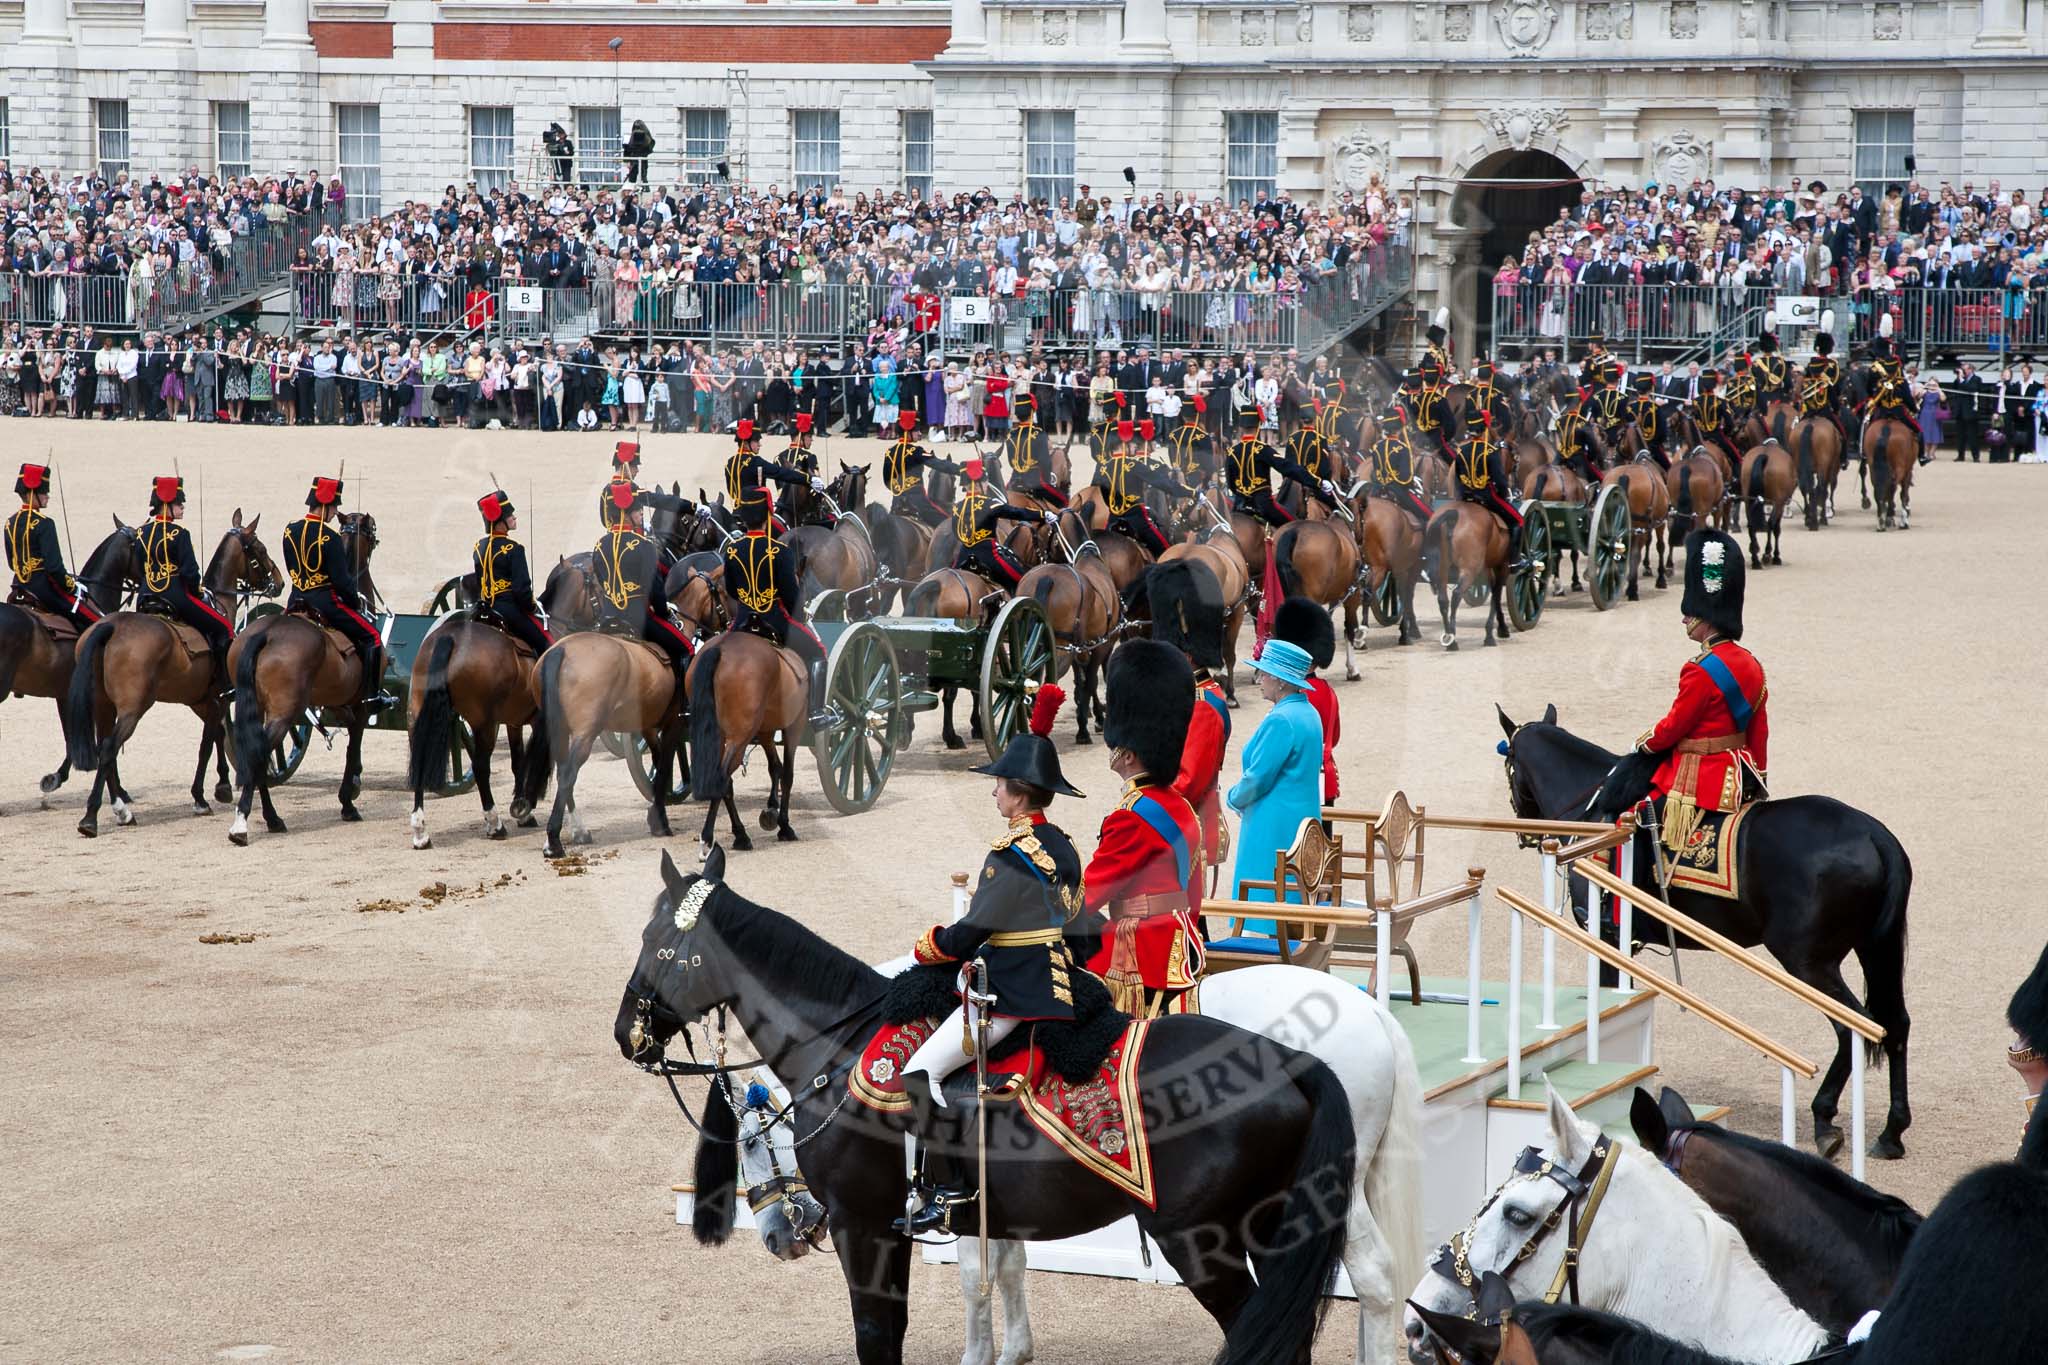 Trooping the Colour 2009: The King's Troop Royal Horse Artillery riding past Her Majesty. Next to the aluting base are the Royal Colonels - in front, HRH Princess Anne, the Princess Royal, next to her HRH Prince Edward, The Duke of Kent, amd on the other side of the dais HRH Prince Charles, The Prince of Wales..
Horse Guards Parade, Westminster,
London SW1,

United Kingdom,
on 13 June 2009 at 11:58, image #240